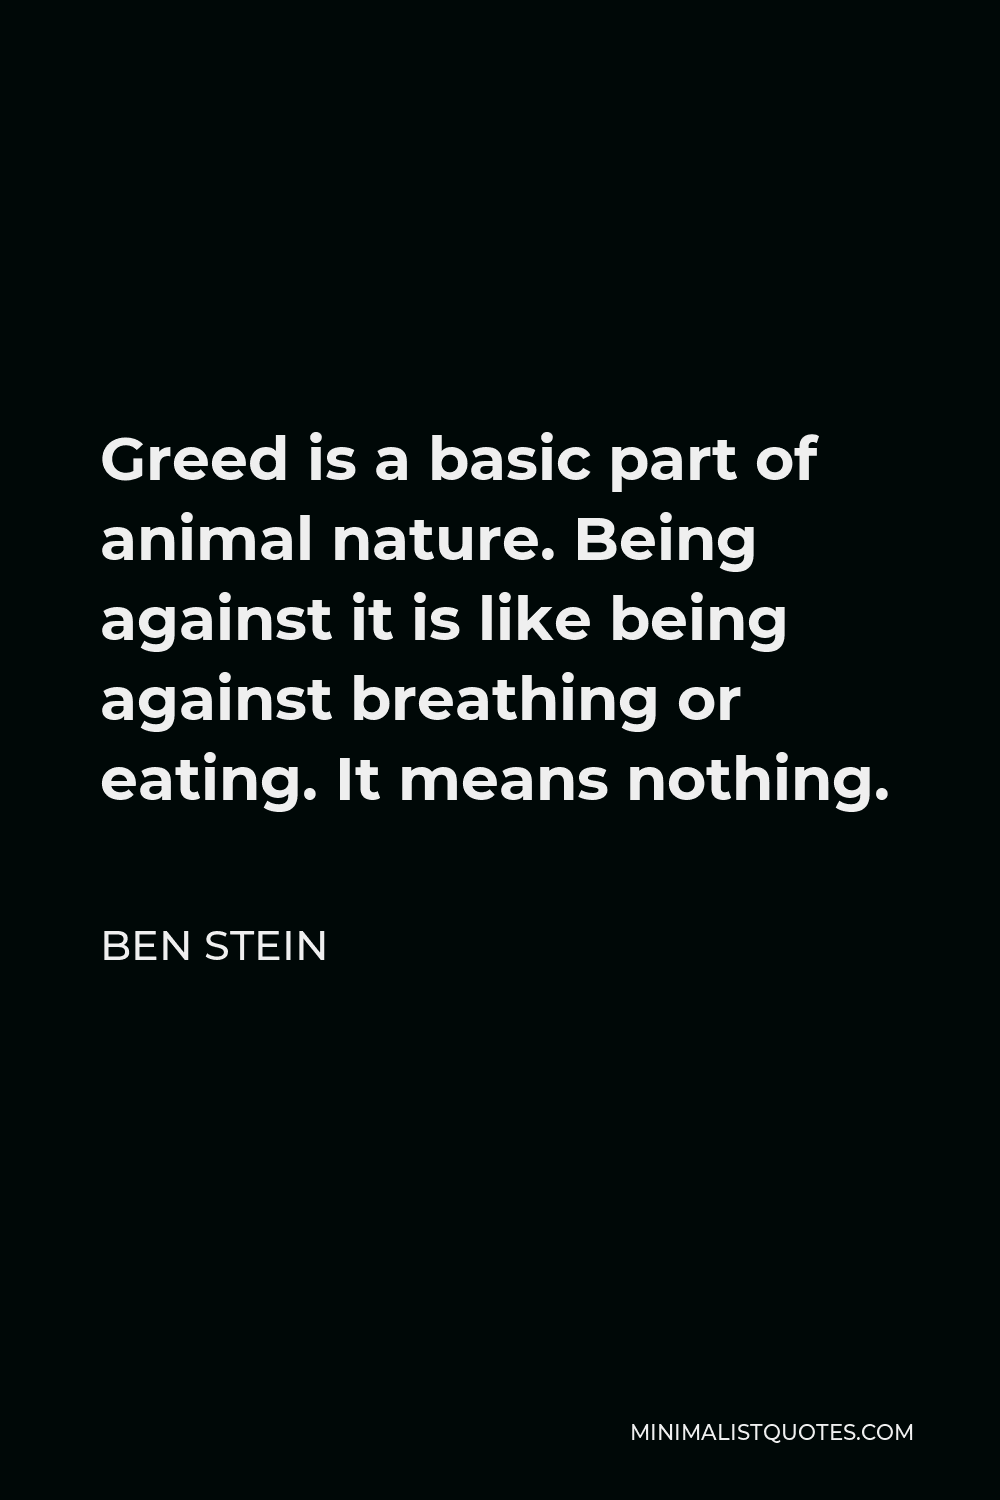 Ben Stein Quote - Greed is a basic part of animal nature. Being against it is like being against breathing or eating. It means nothing.